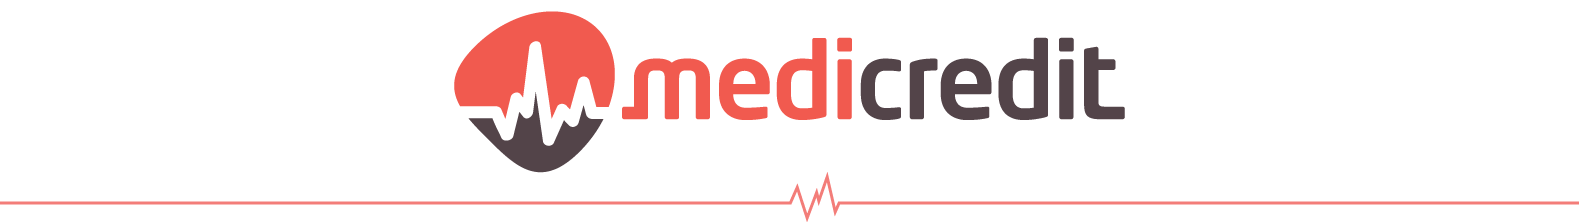 MediCredit small banner for arst.ee.